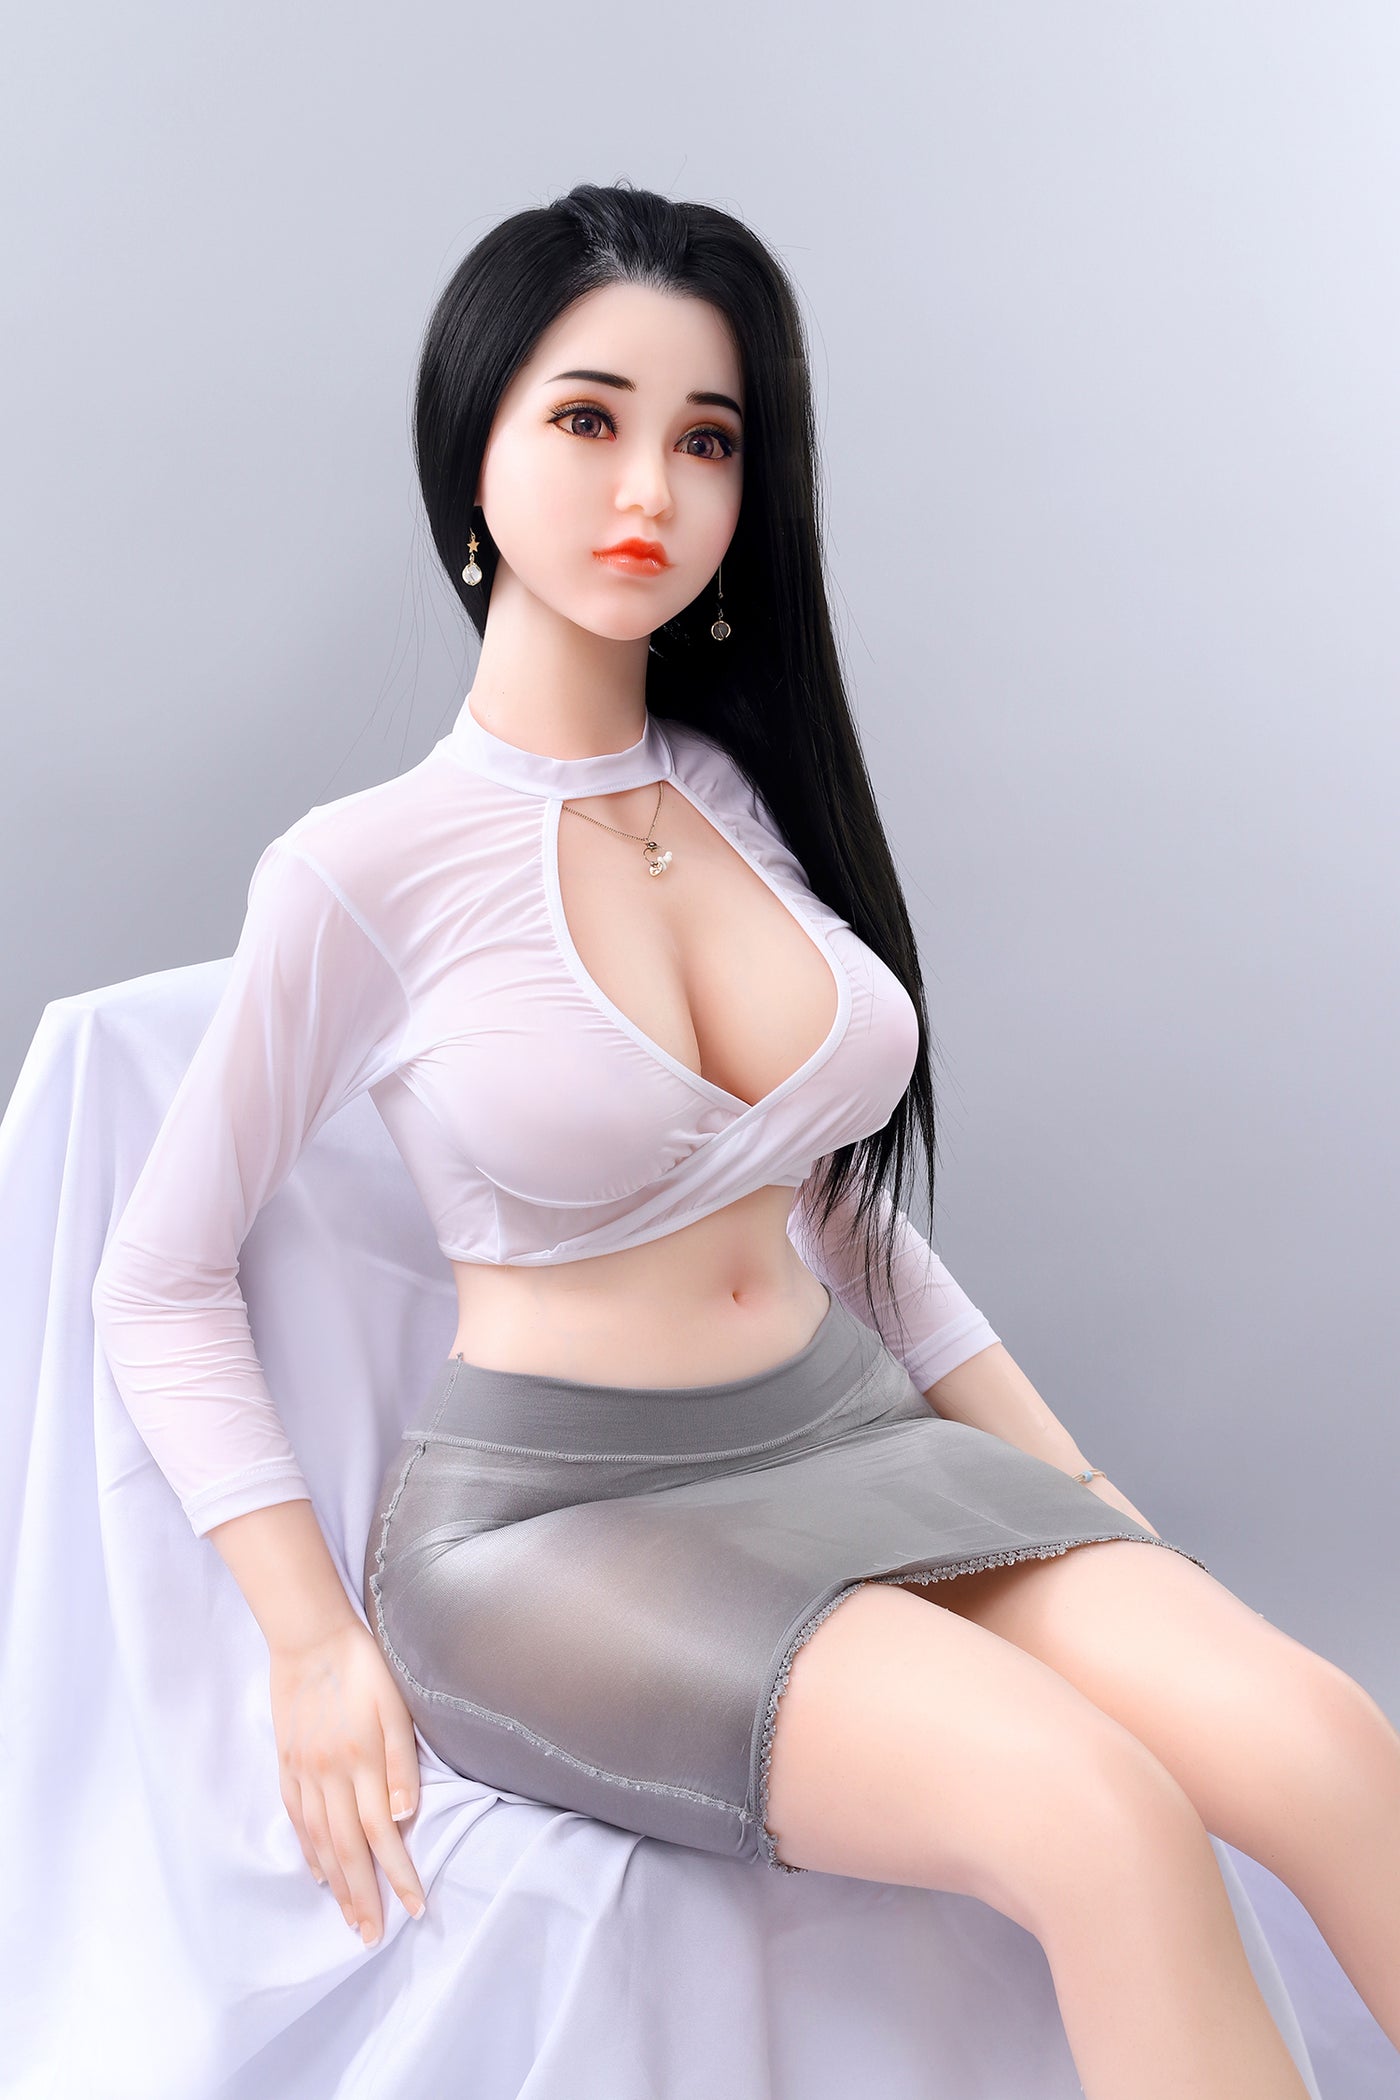 Marlee 5ft4in (164cm) Asian Long Leg Thin Lady Style Silicone Realistic Love Doll